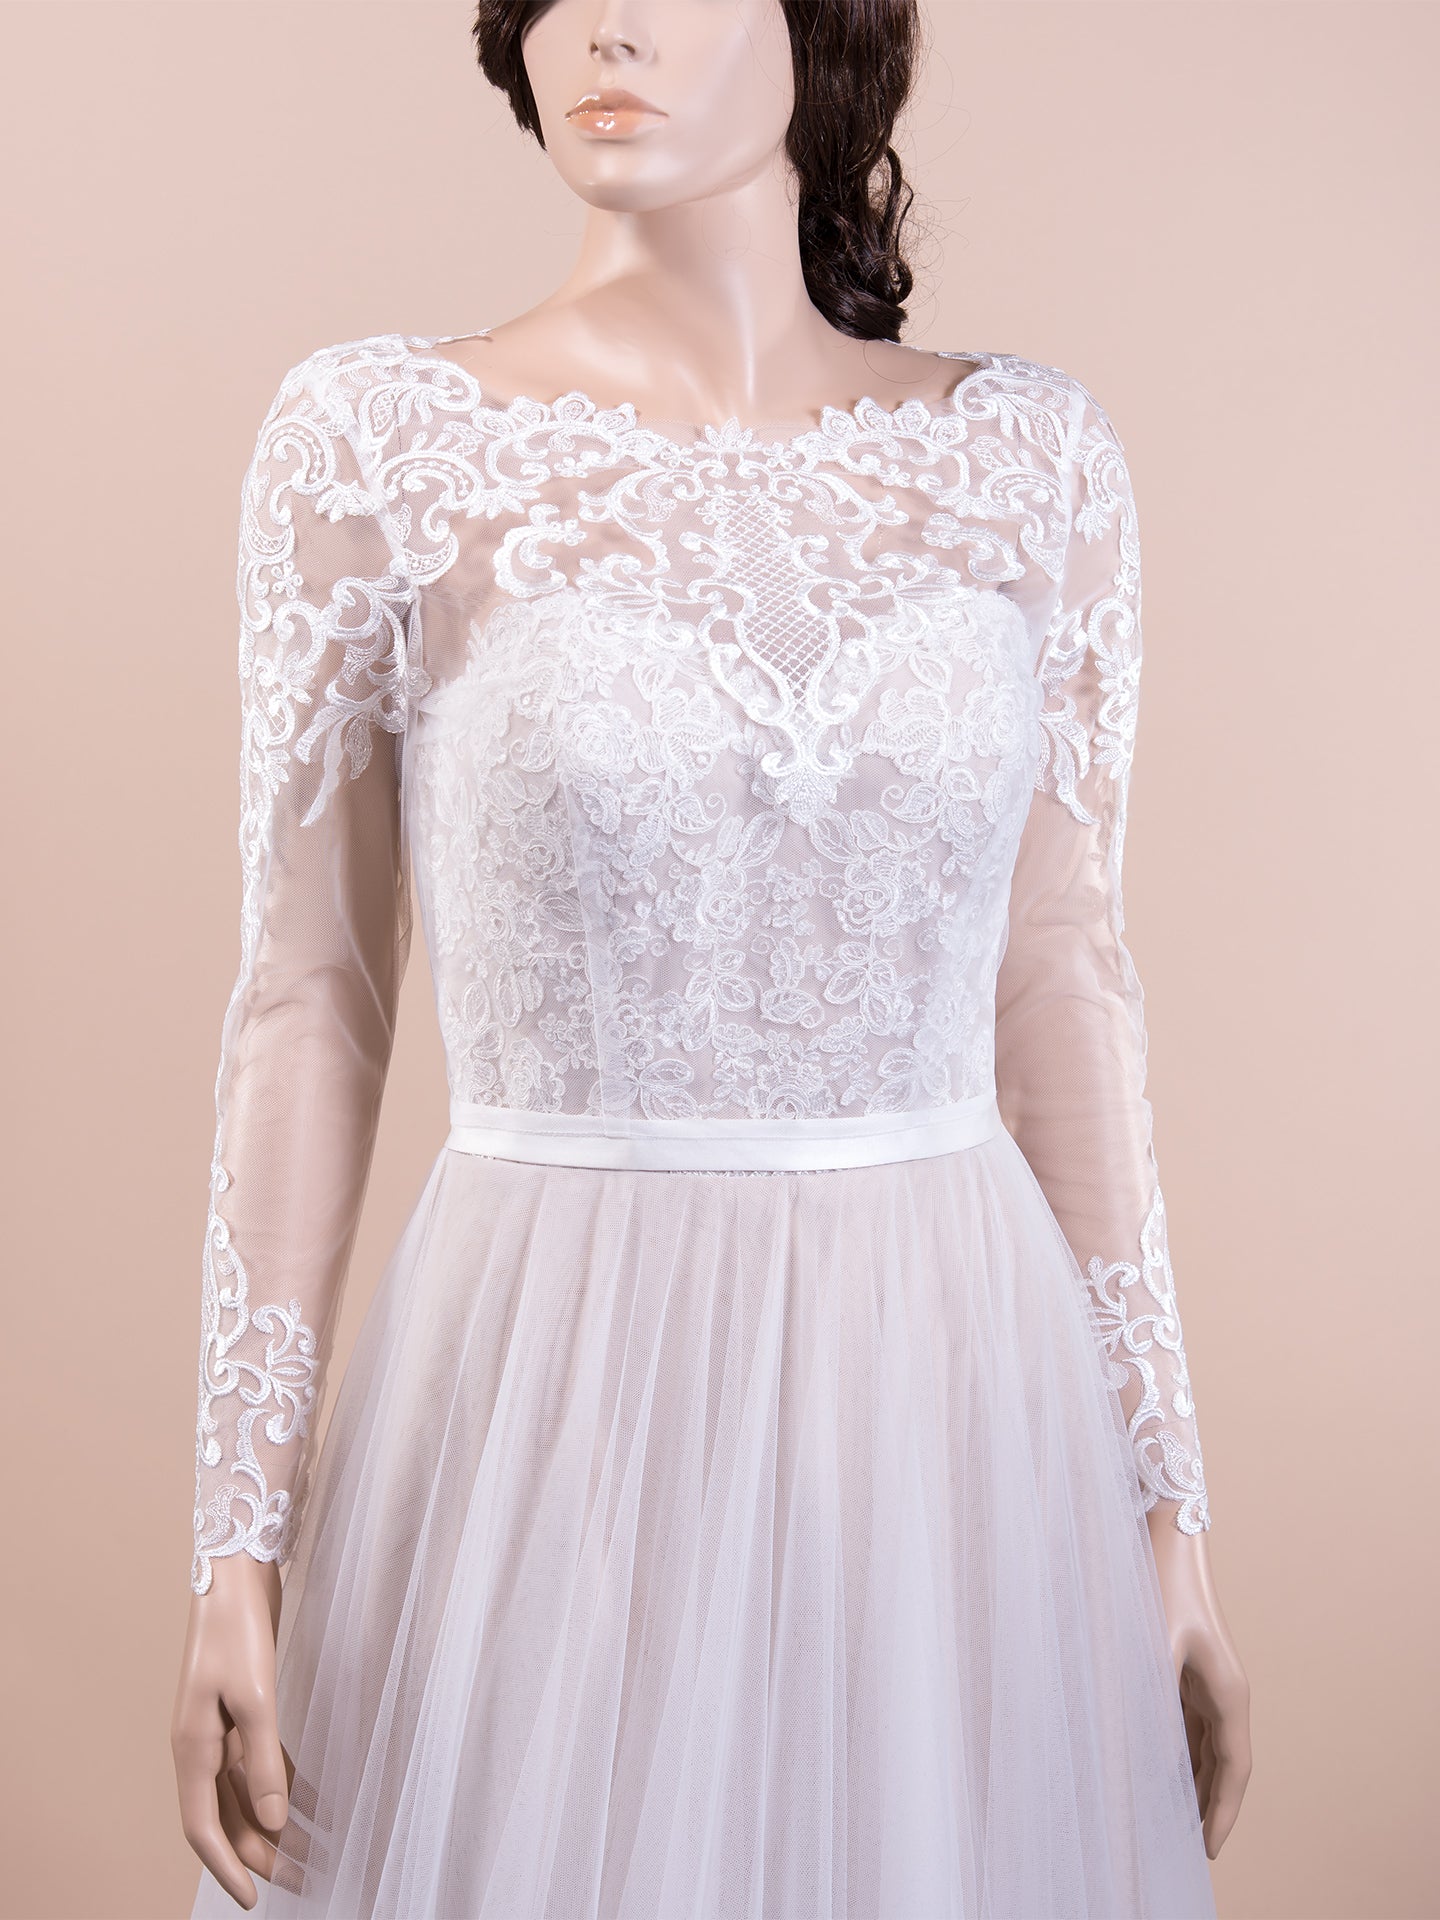 Long sleeve embroidered lace wedding dress topper WJ054